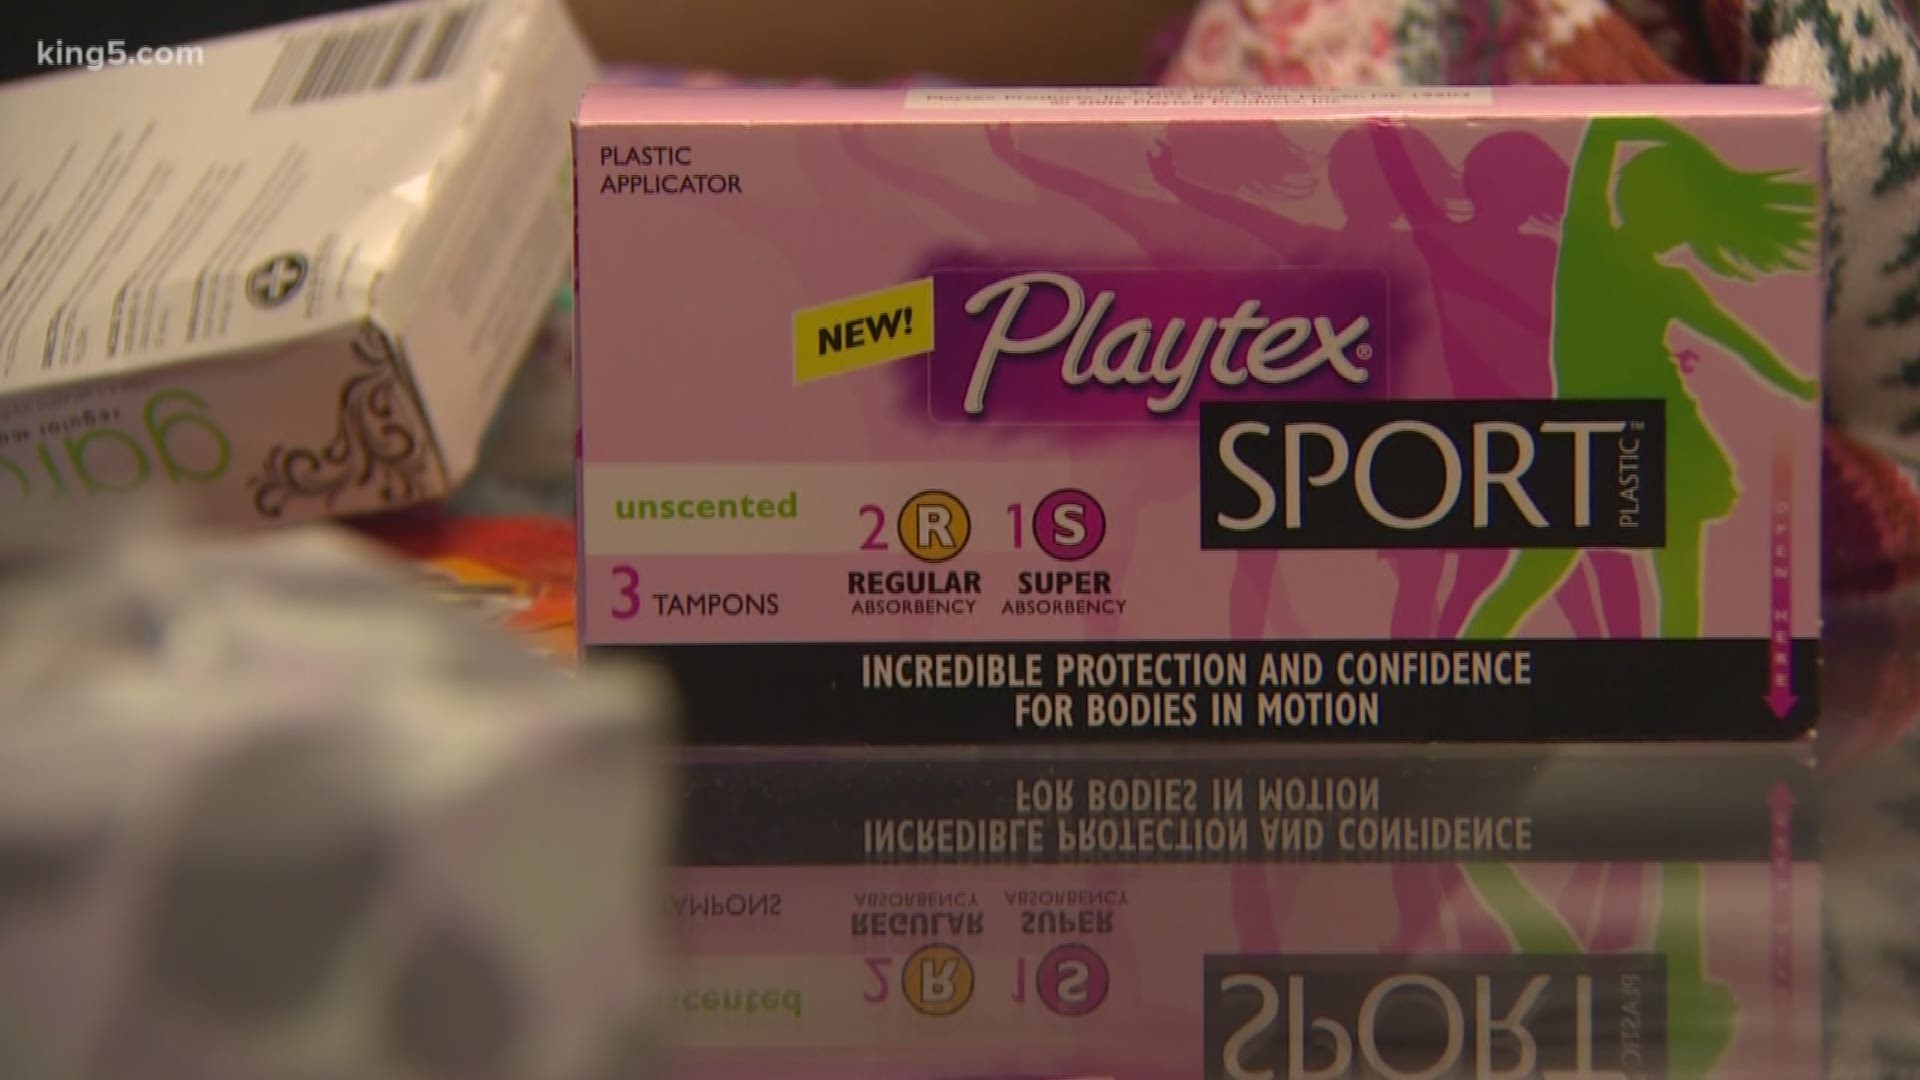 Should Seattle get rid of the tampon tax? Nine states have already made the hygiene products exempt from sales tax. Now a city councilmember wants Seattle to investigate the idea. KING 5's Natalie Swaby reports.